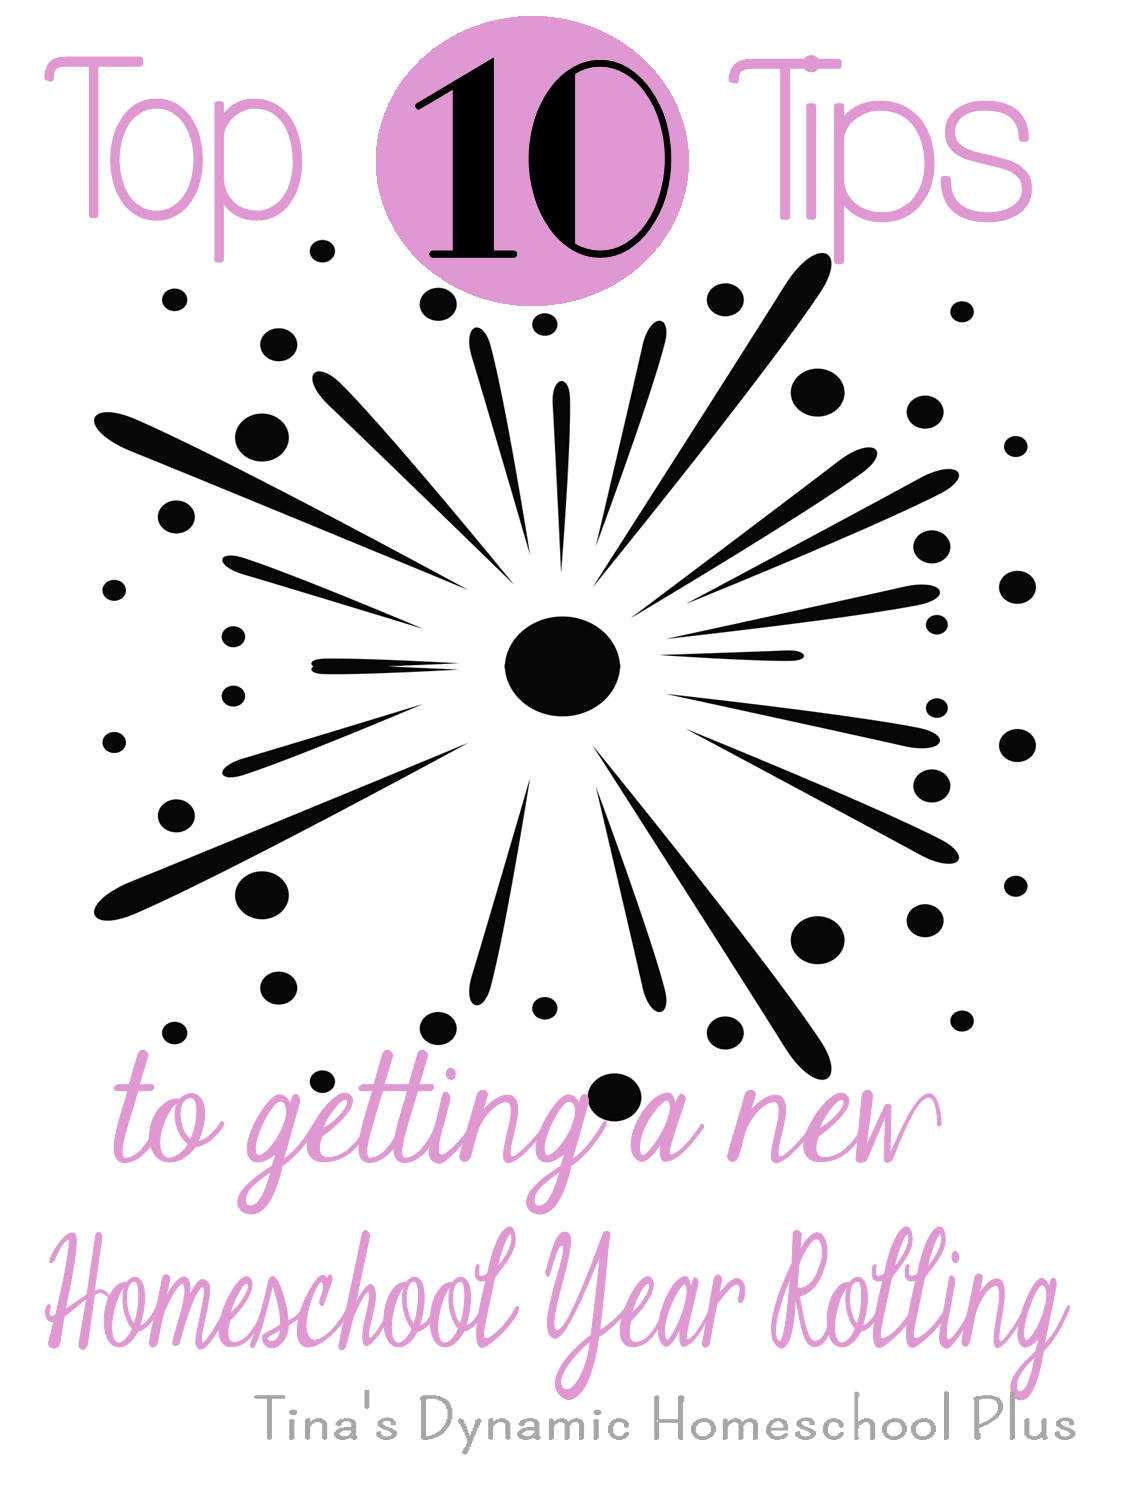 Top 10 Tips to Getting a New Homeschool Year Rolling